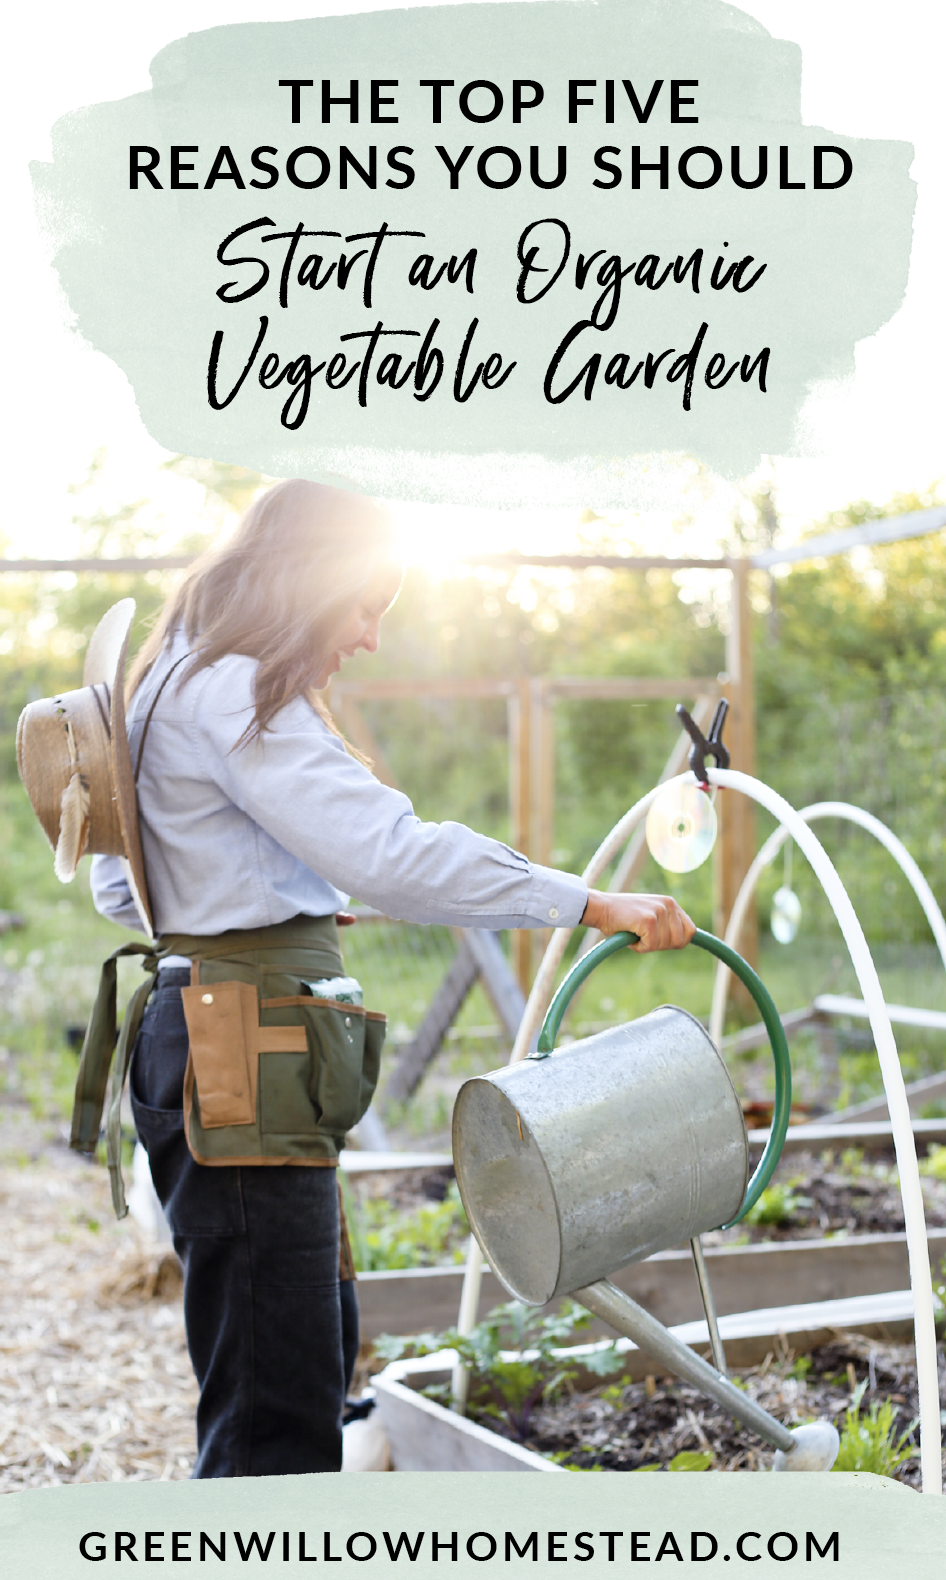 The top five reasons you should start an organic vegetable garden and grow your green thumb